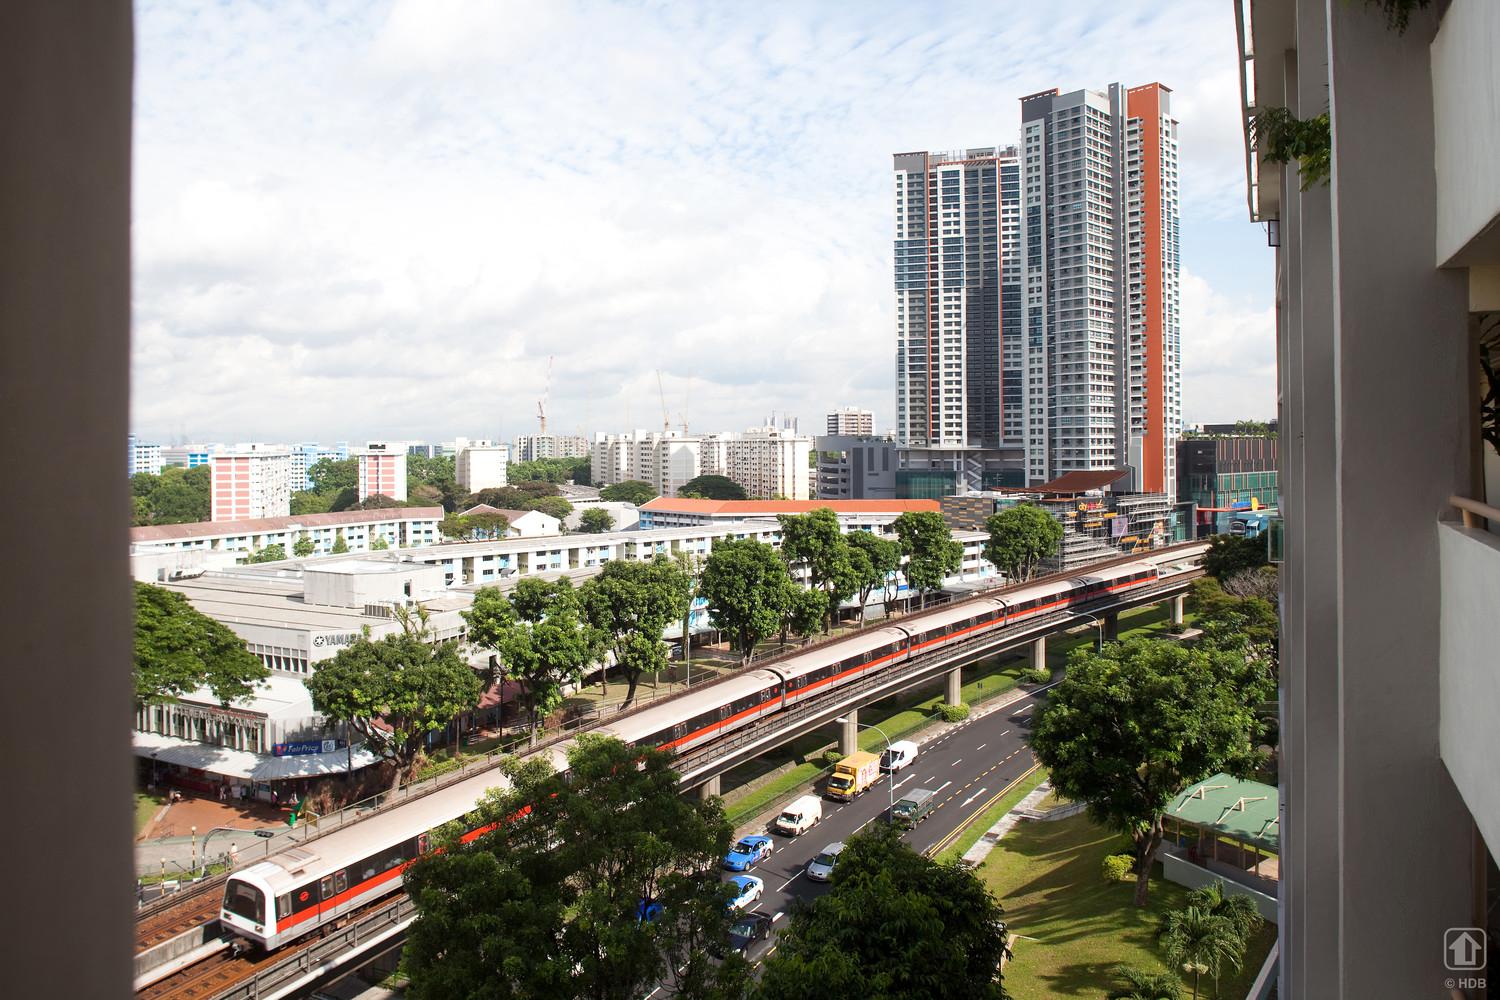 Clementi Mixed Development - Overview